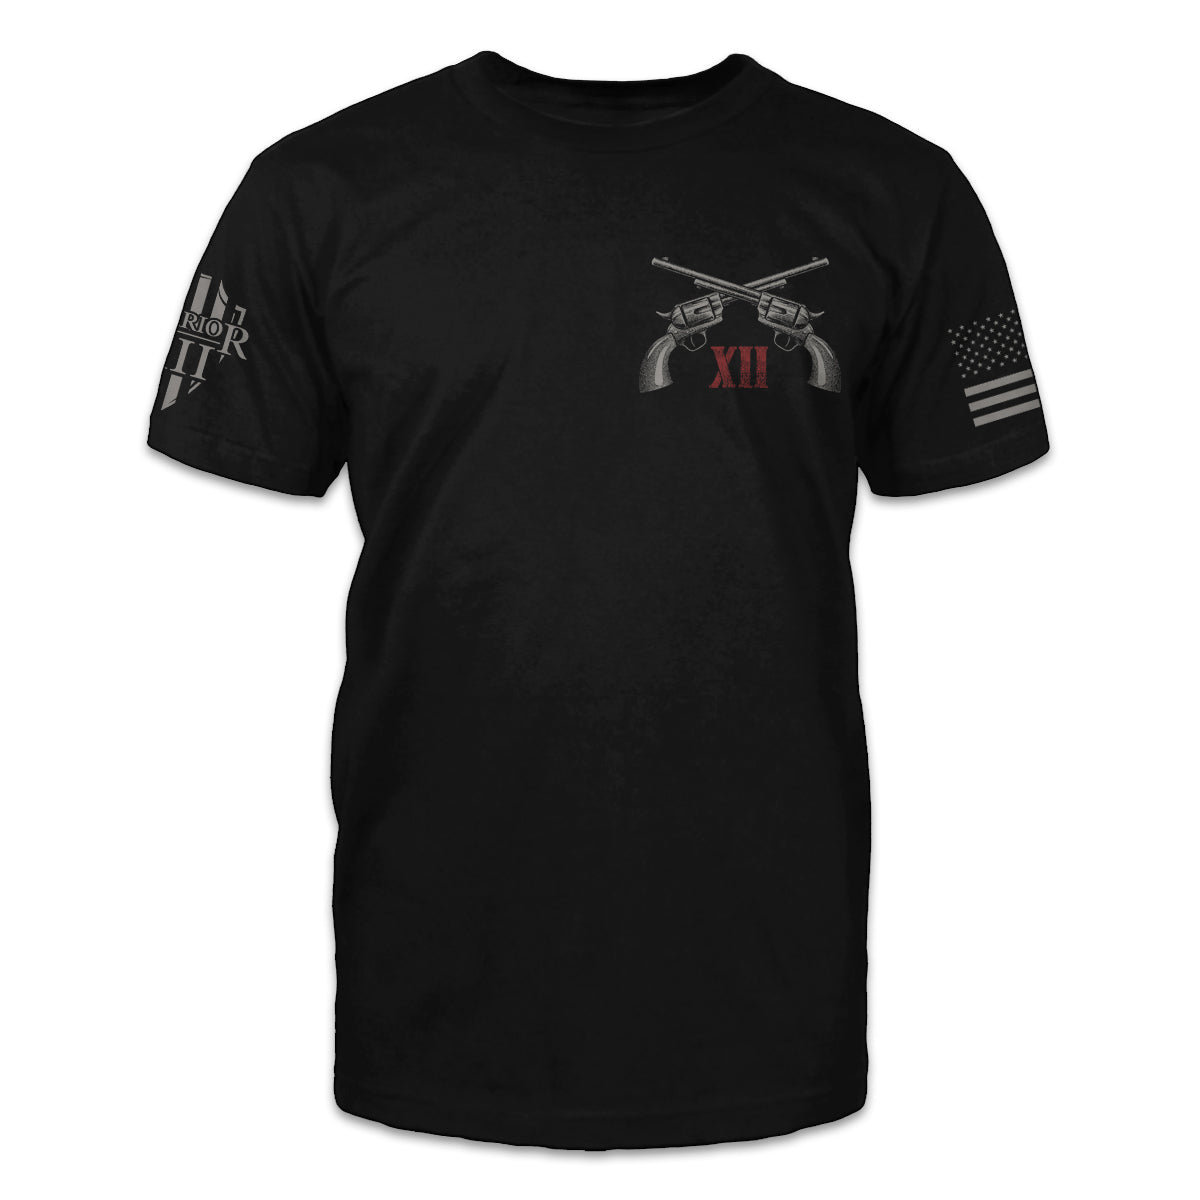 A black t-shirt with two pistols crossed over with the words "XII" printed on the front.